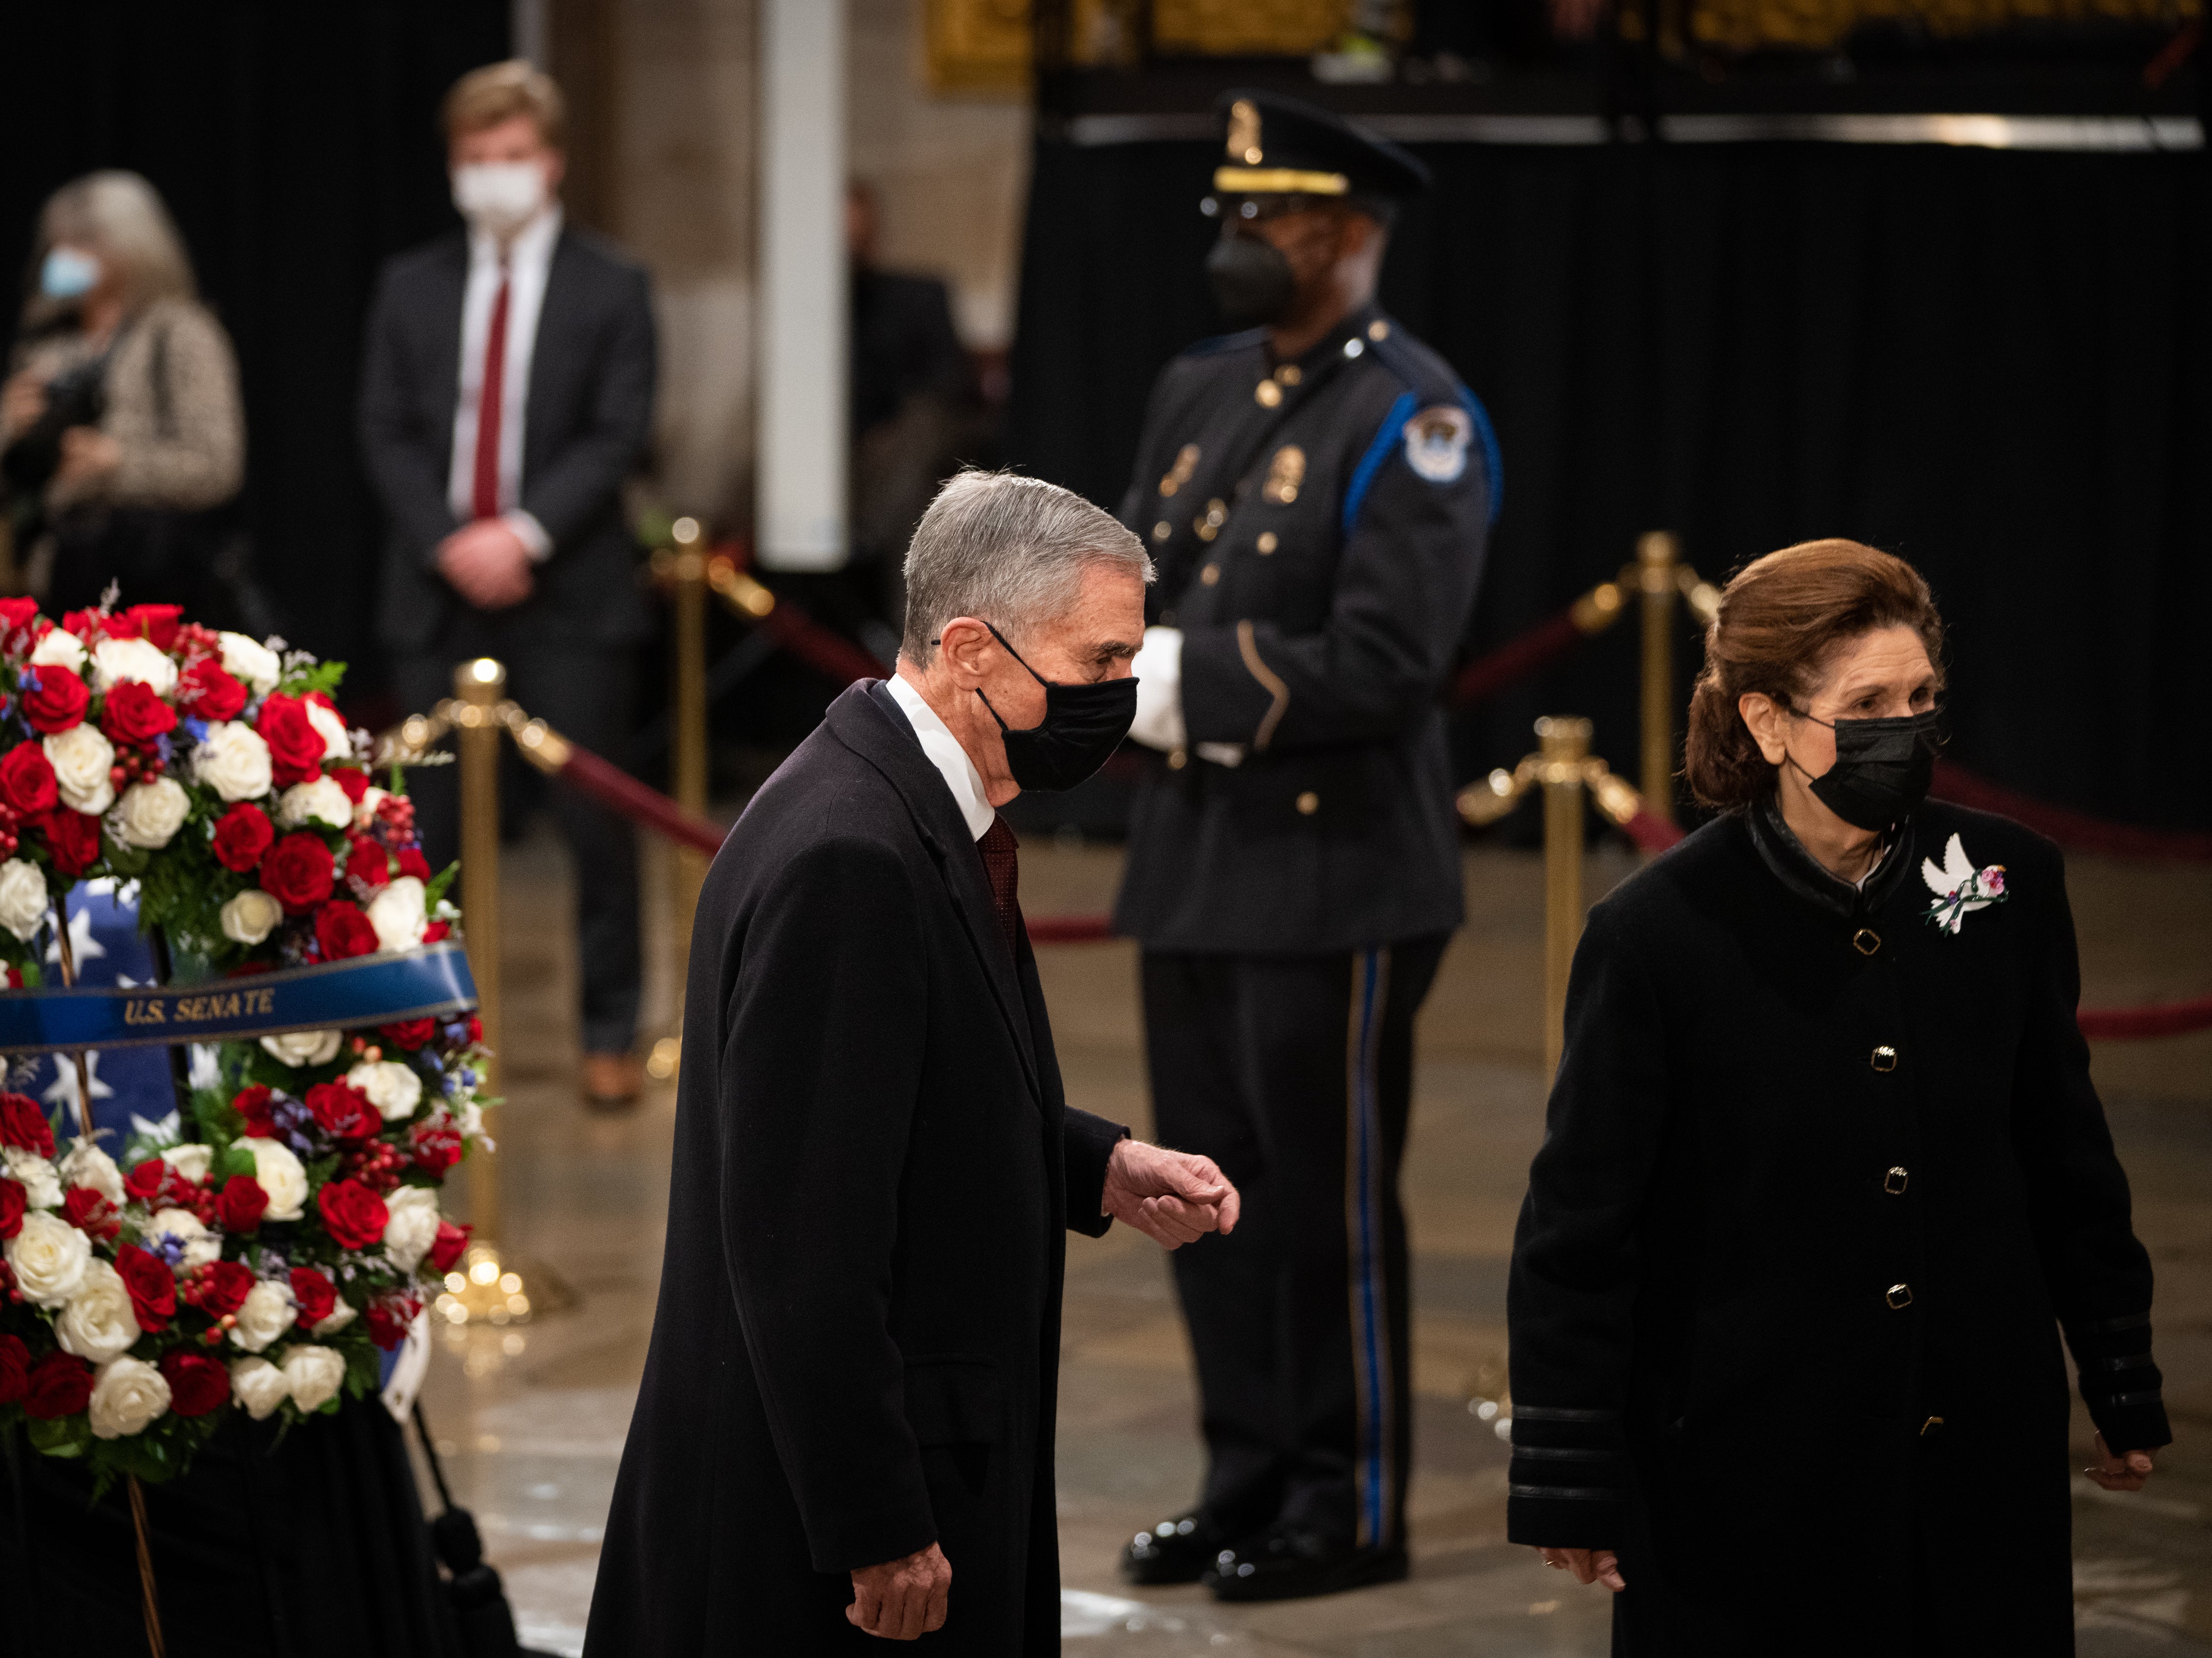 Robb and Johnson Robb pay their respects to former Senator Bob Dole as he lies in state at the Rotunda of the Capitol on December 9, 2021